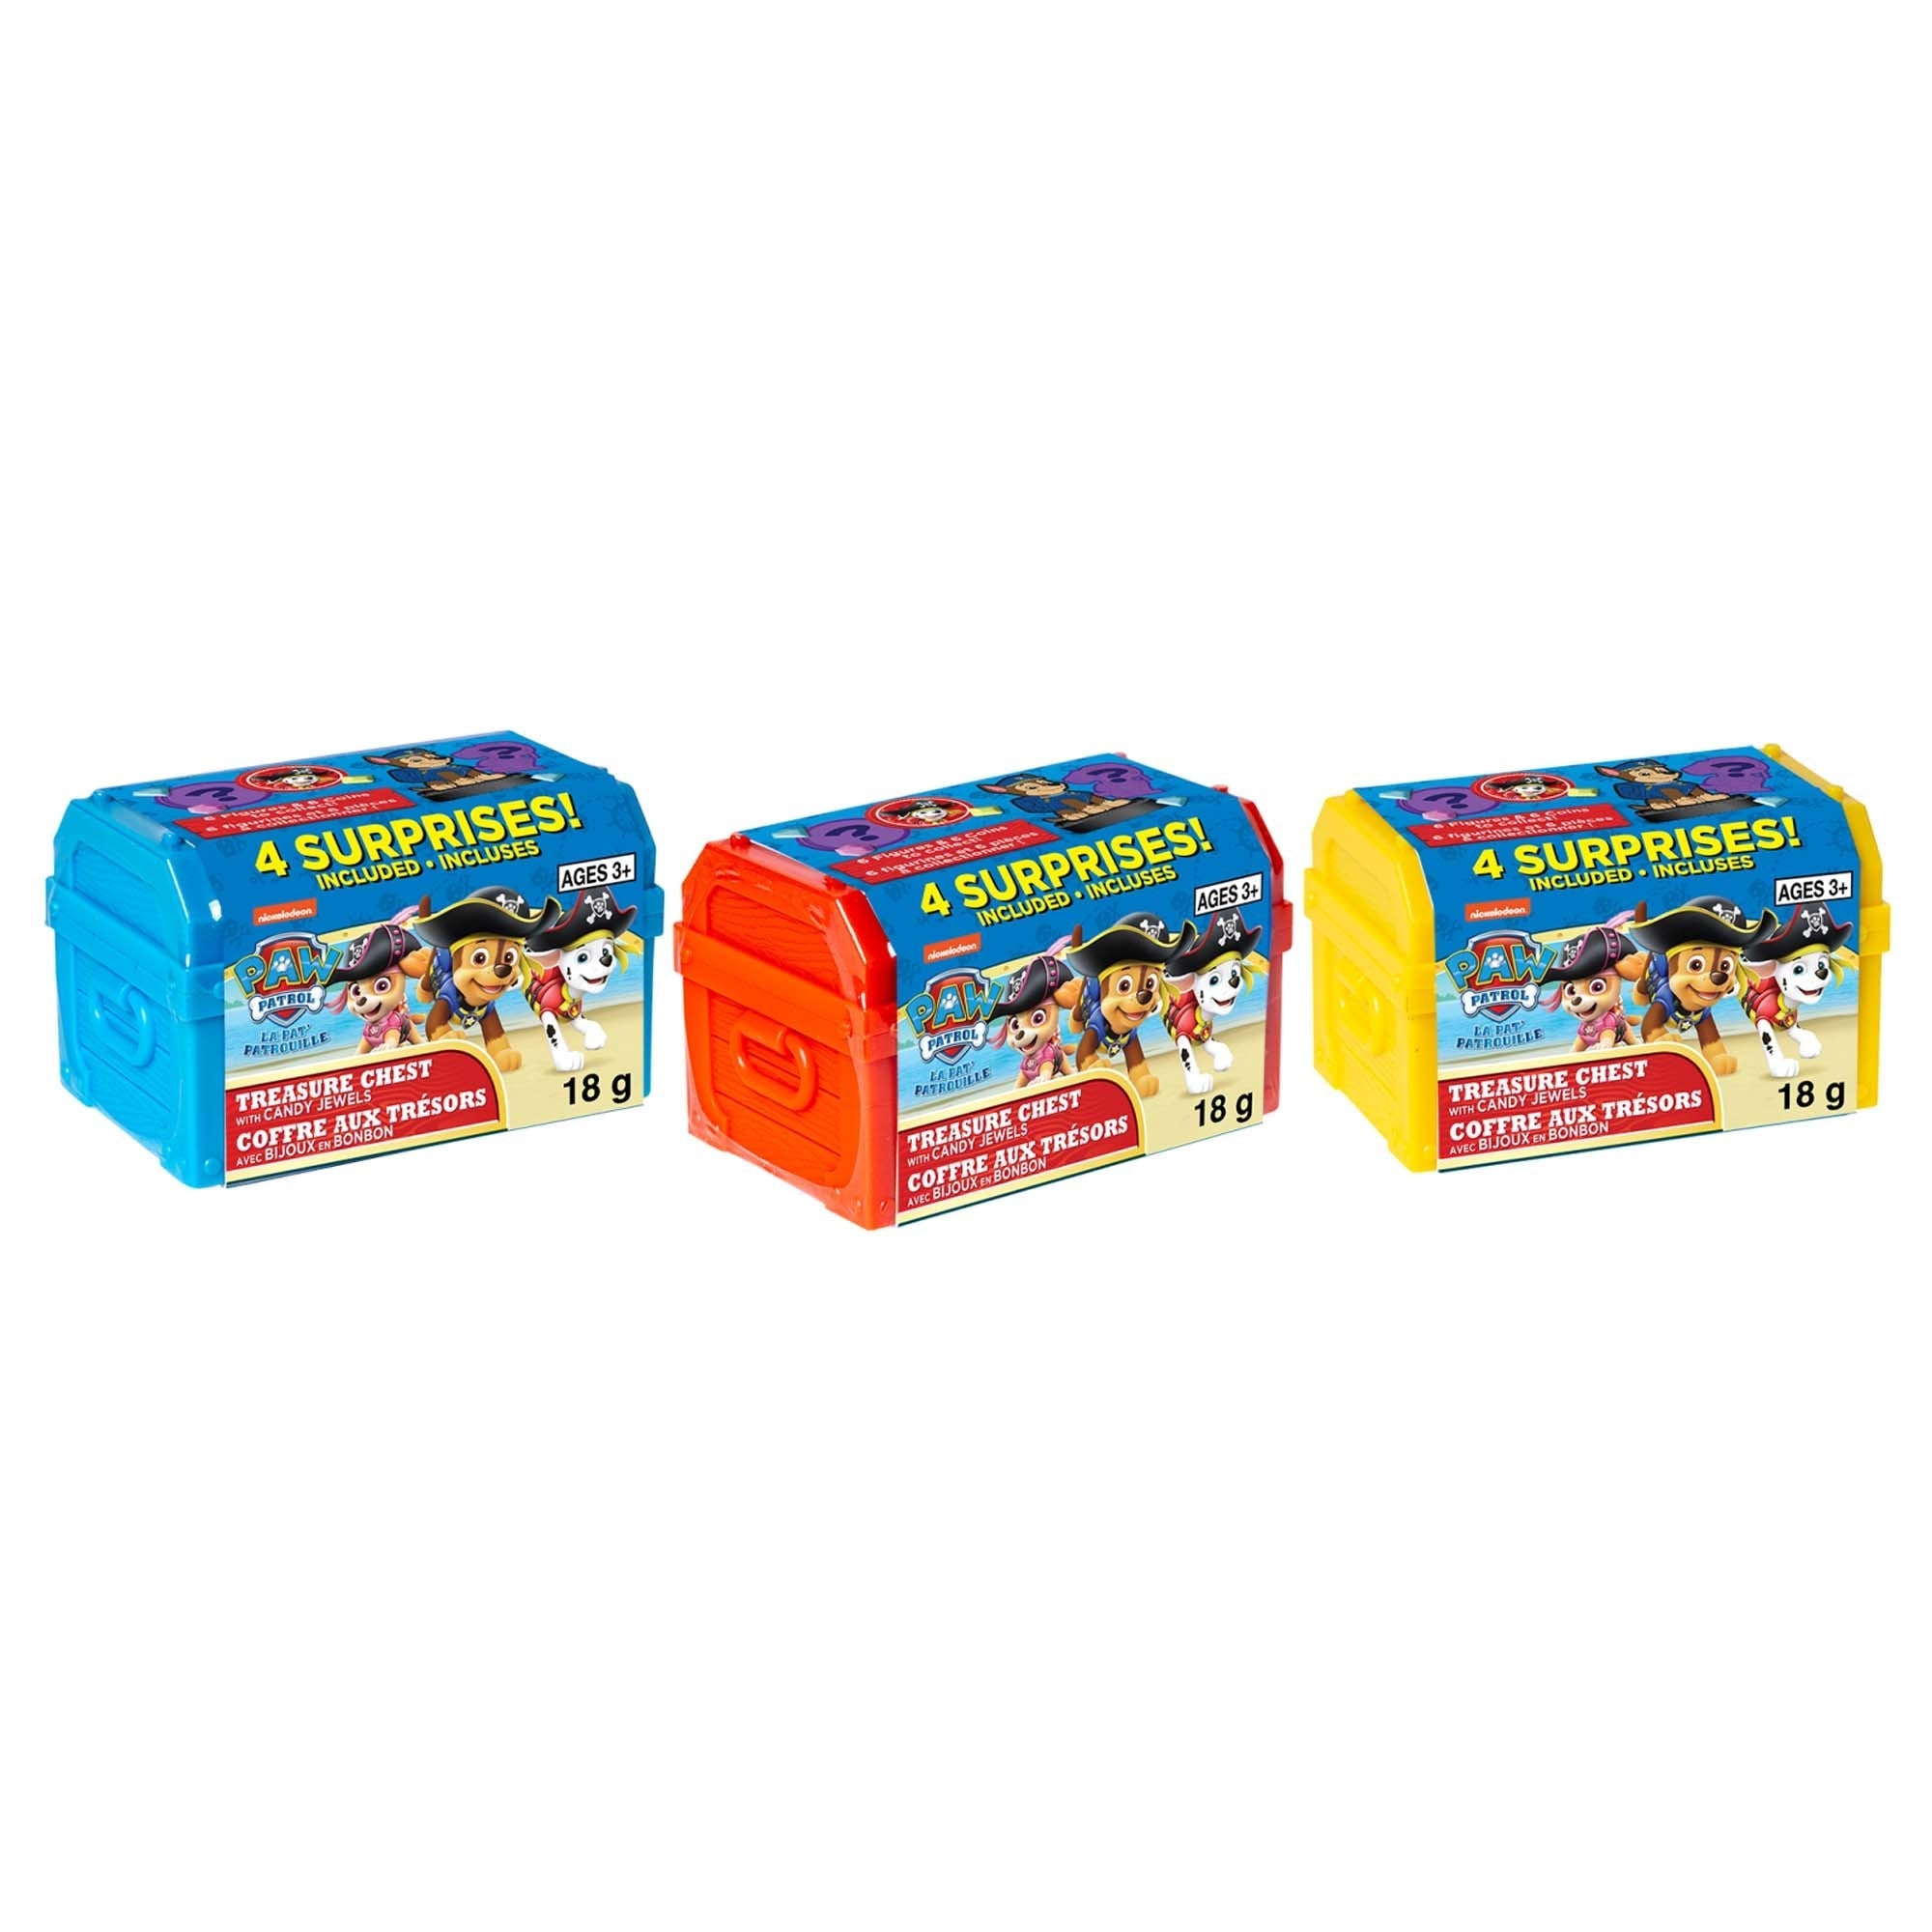 Paw Patrol Treasure Chest with Candy Jewels, 18 g, Assortment, 1 Count